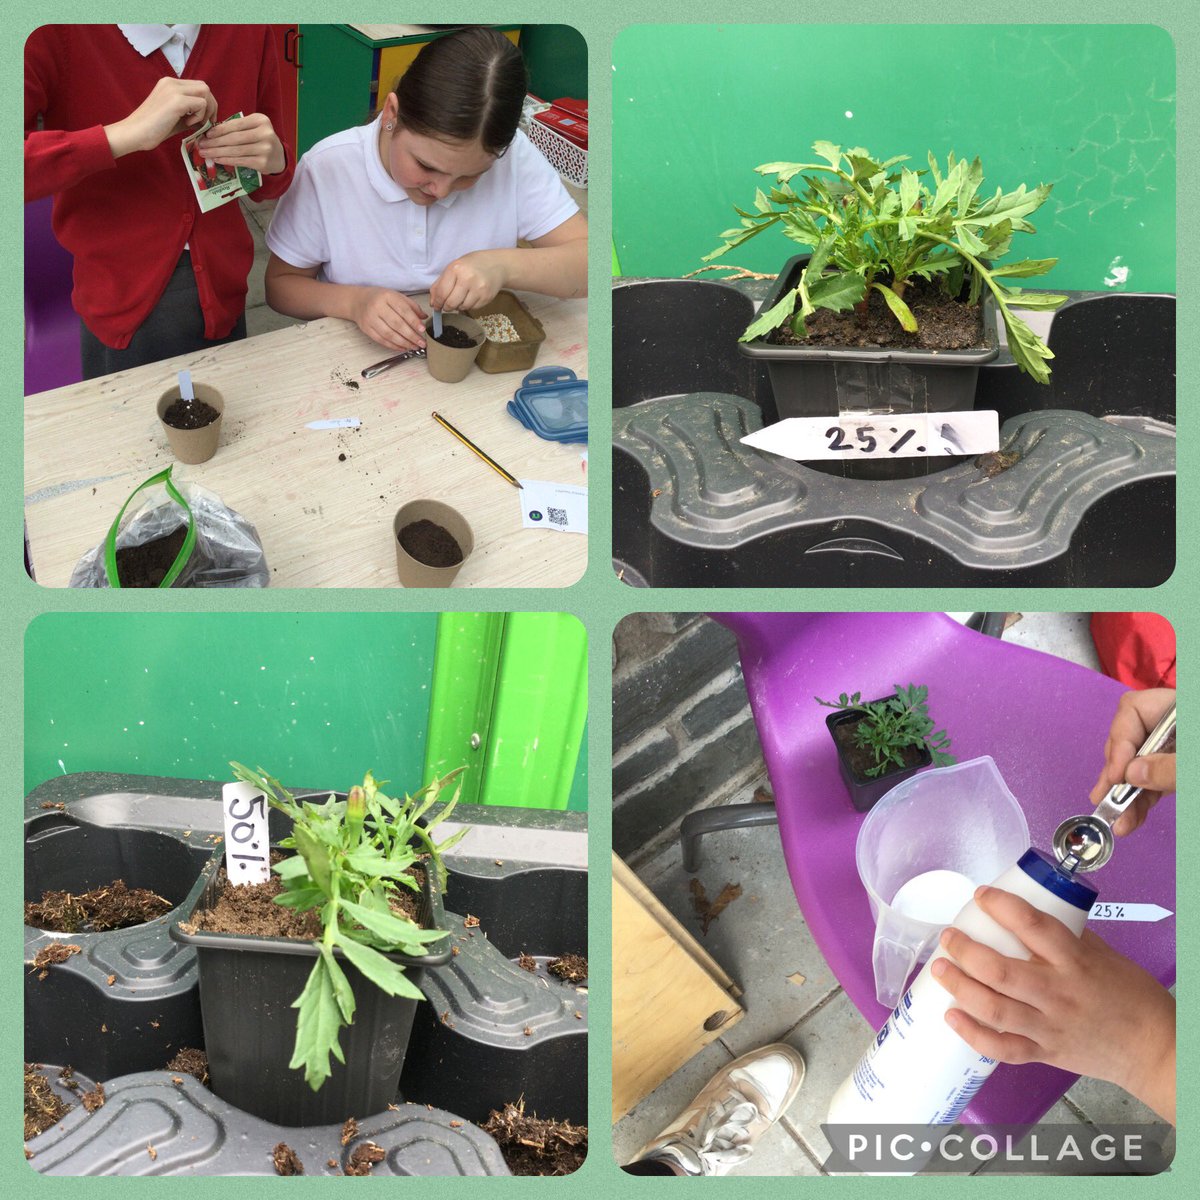 In Dosbarth 10 today we set up our science investigations to find out the effects of salt, fertiliser and light levels on plant growth. We’ll be monitoring how our plants grow over the next week @garntegprimary